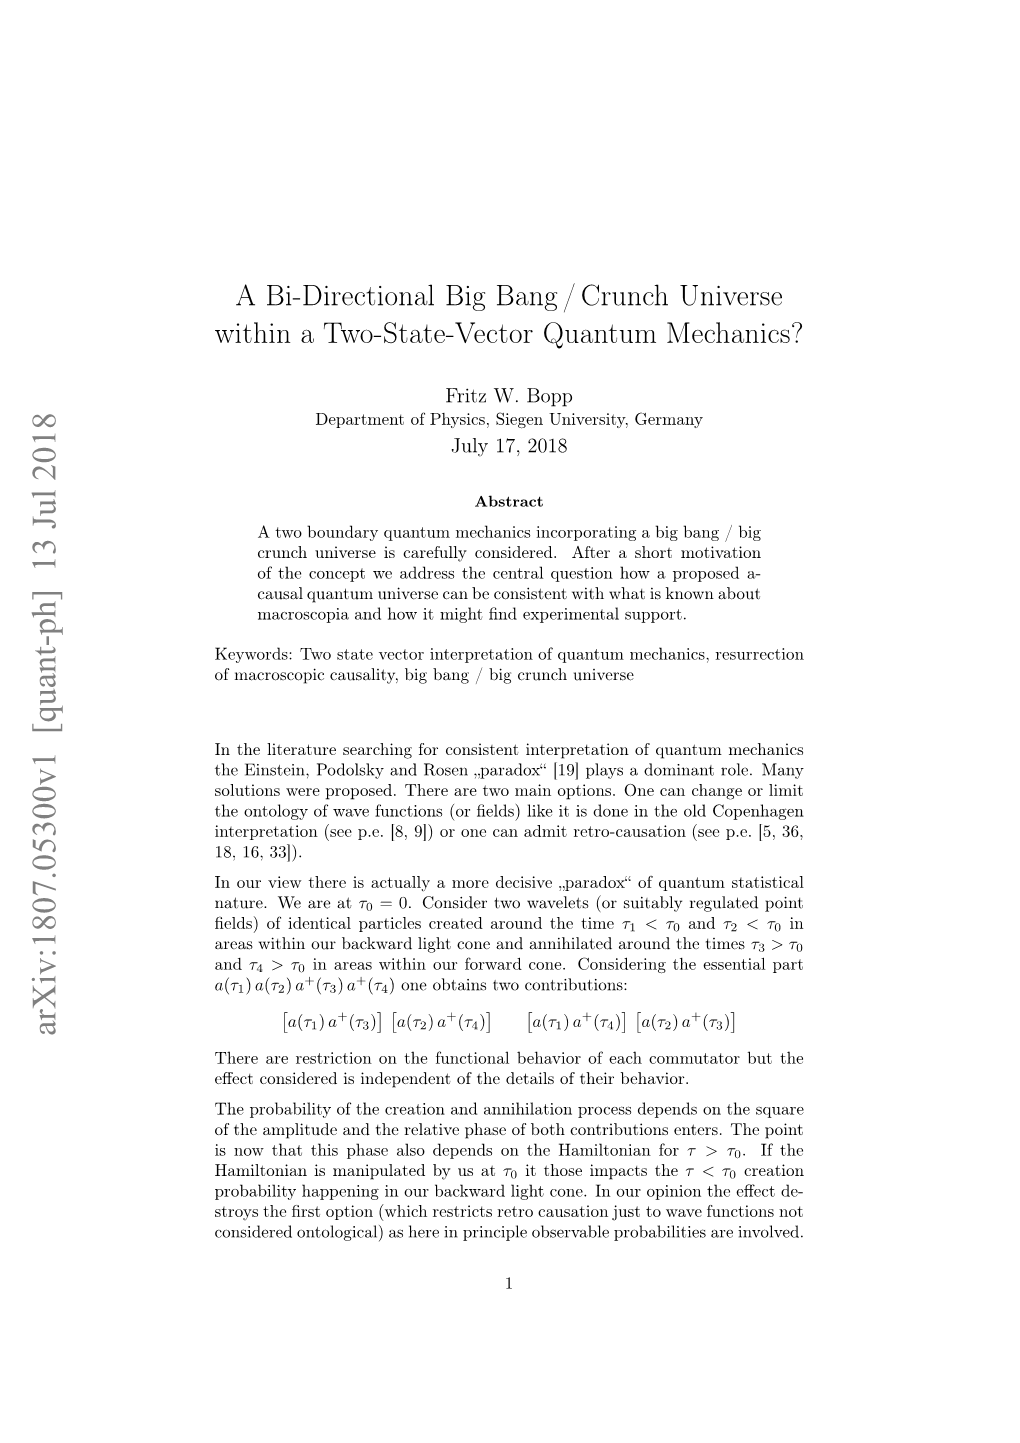 A Bi-Directional Big Bang / Crunch Universe Within a Two-State